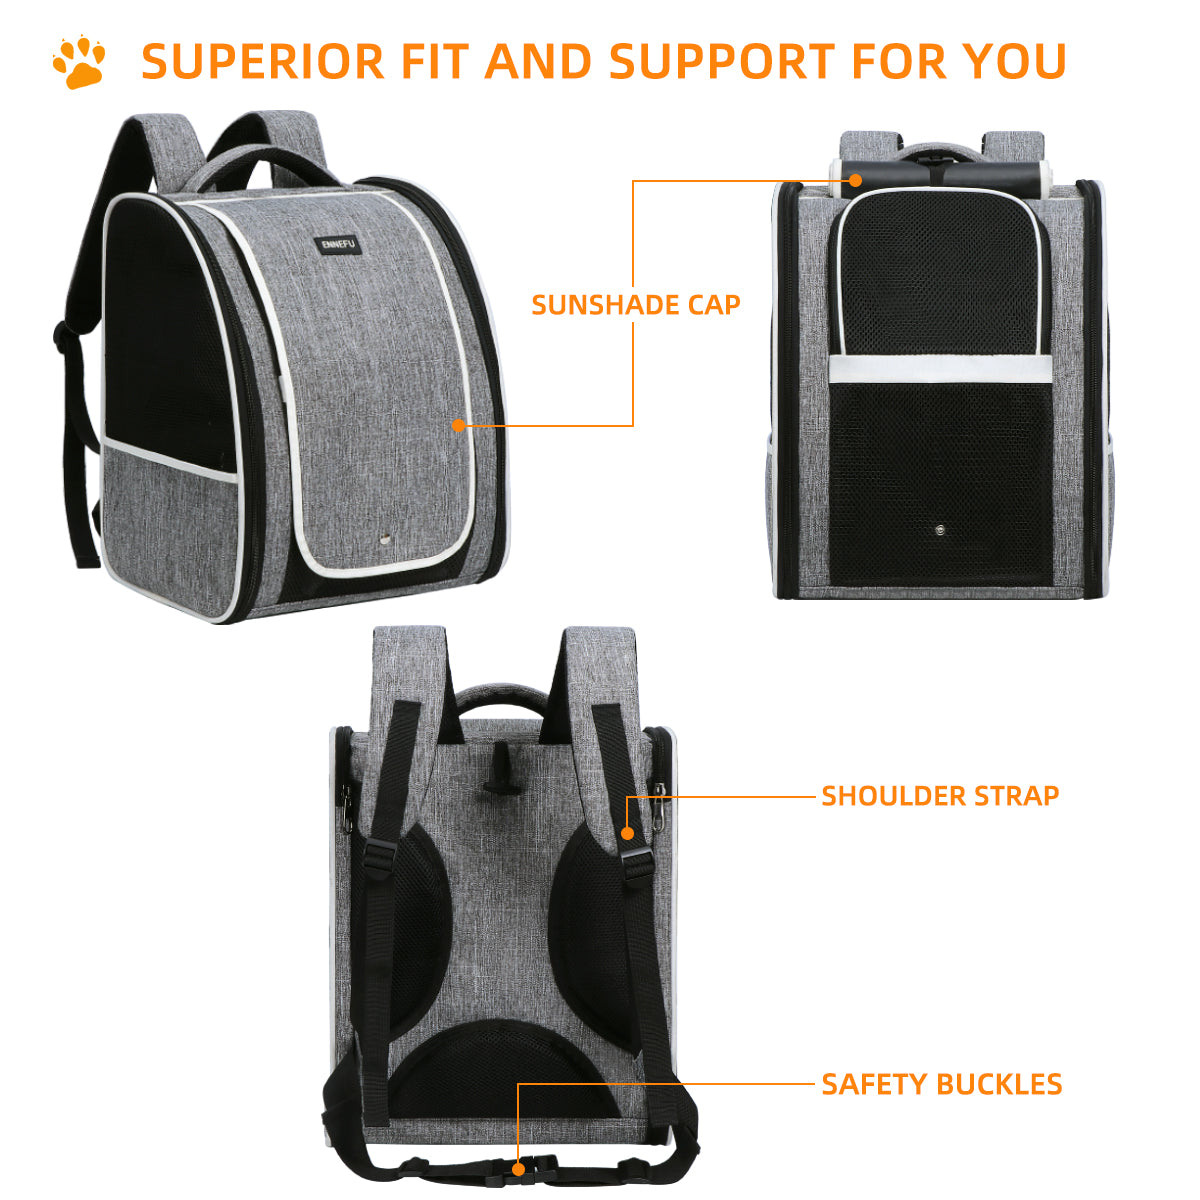 Flap trapezoid pet backpack